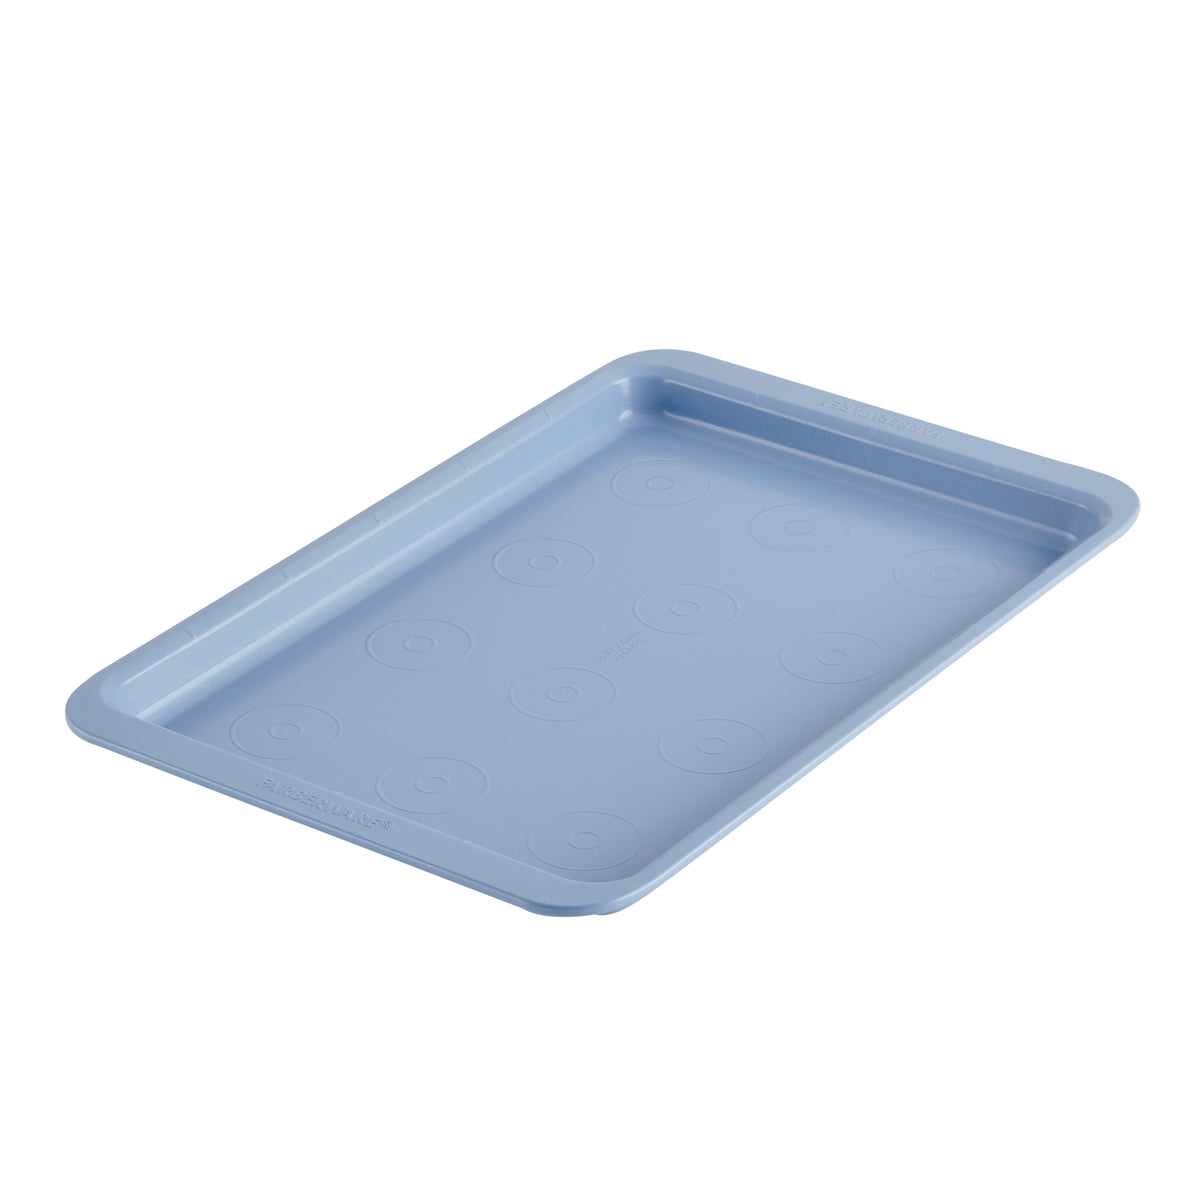 Airbake Cake Pan with clear plastic lid - household items - by